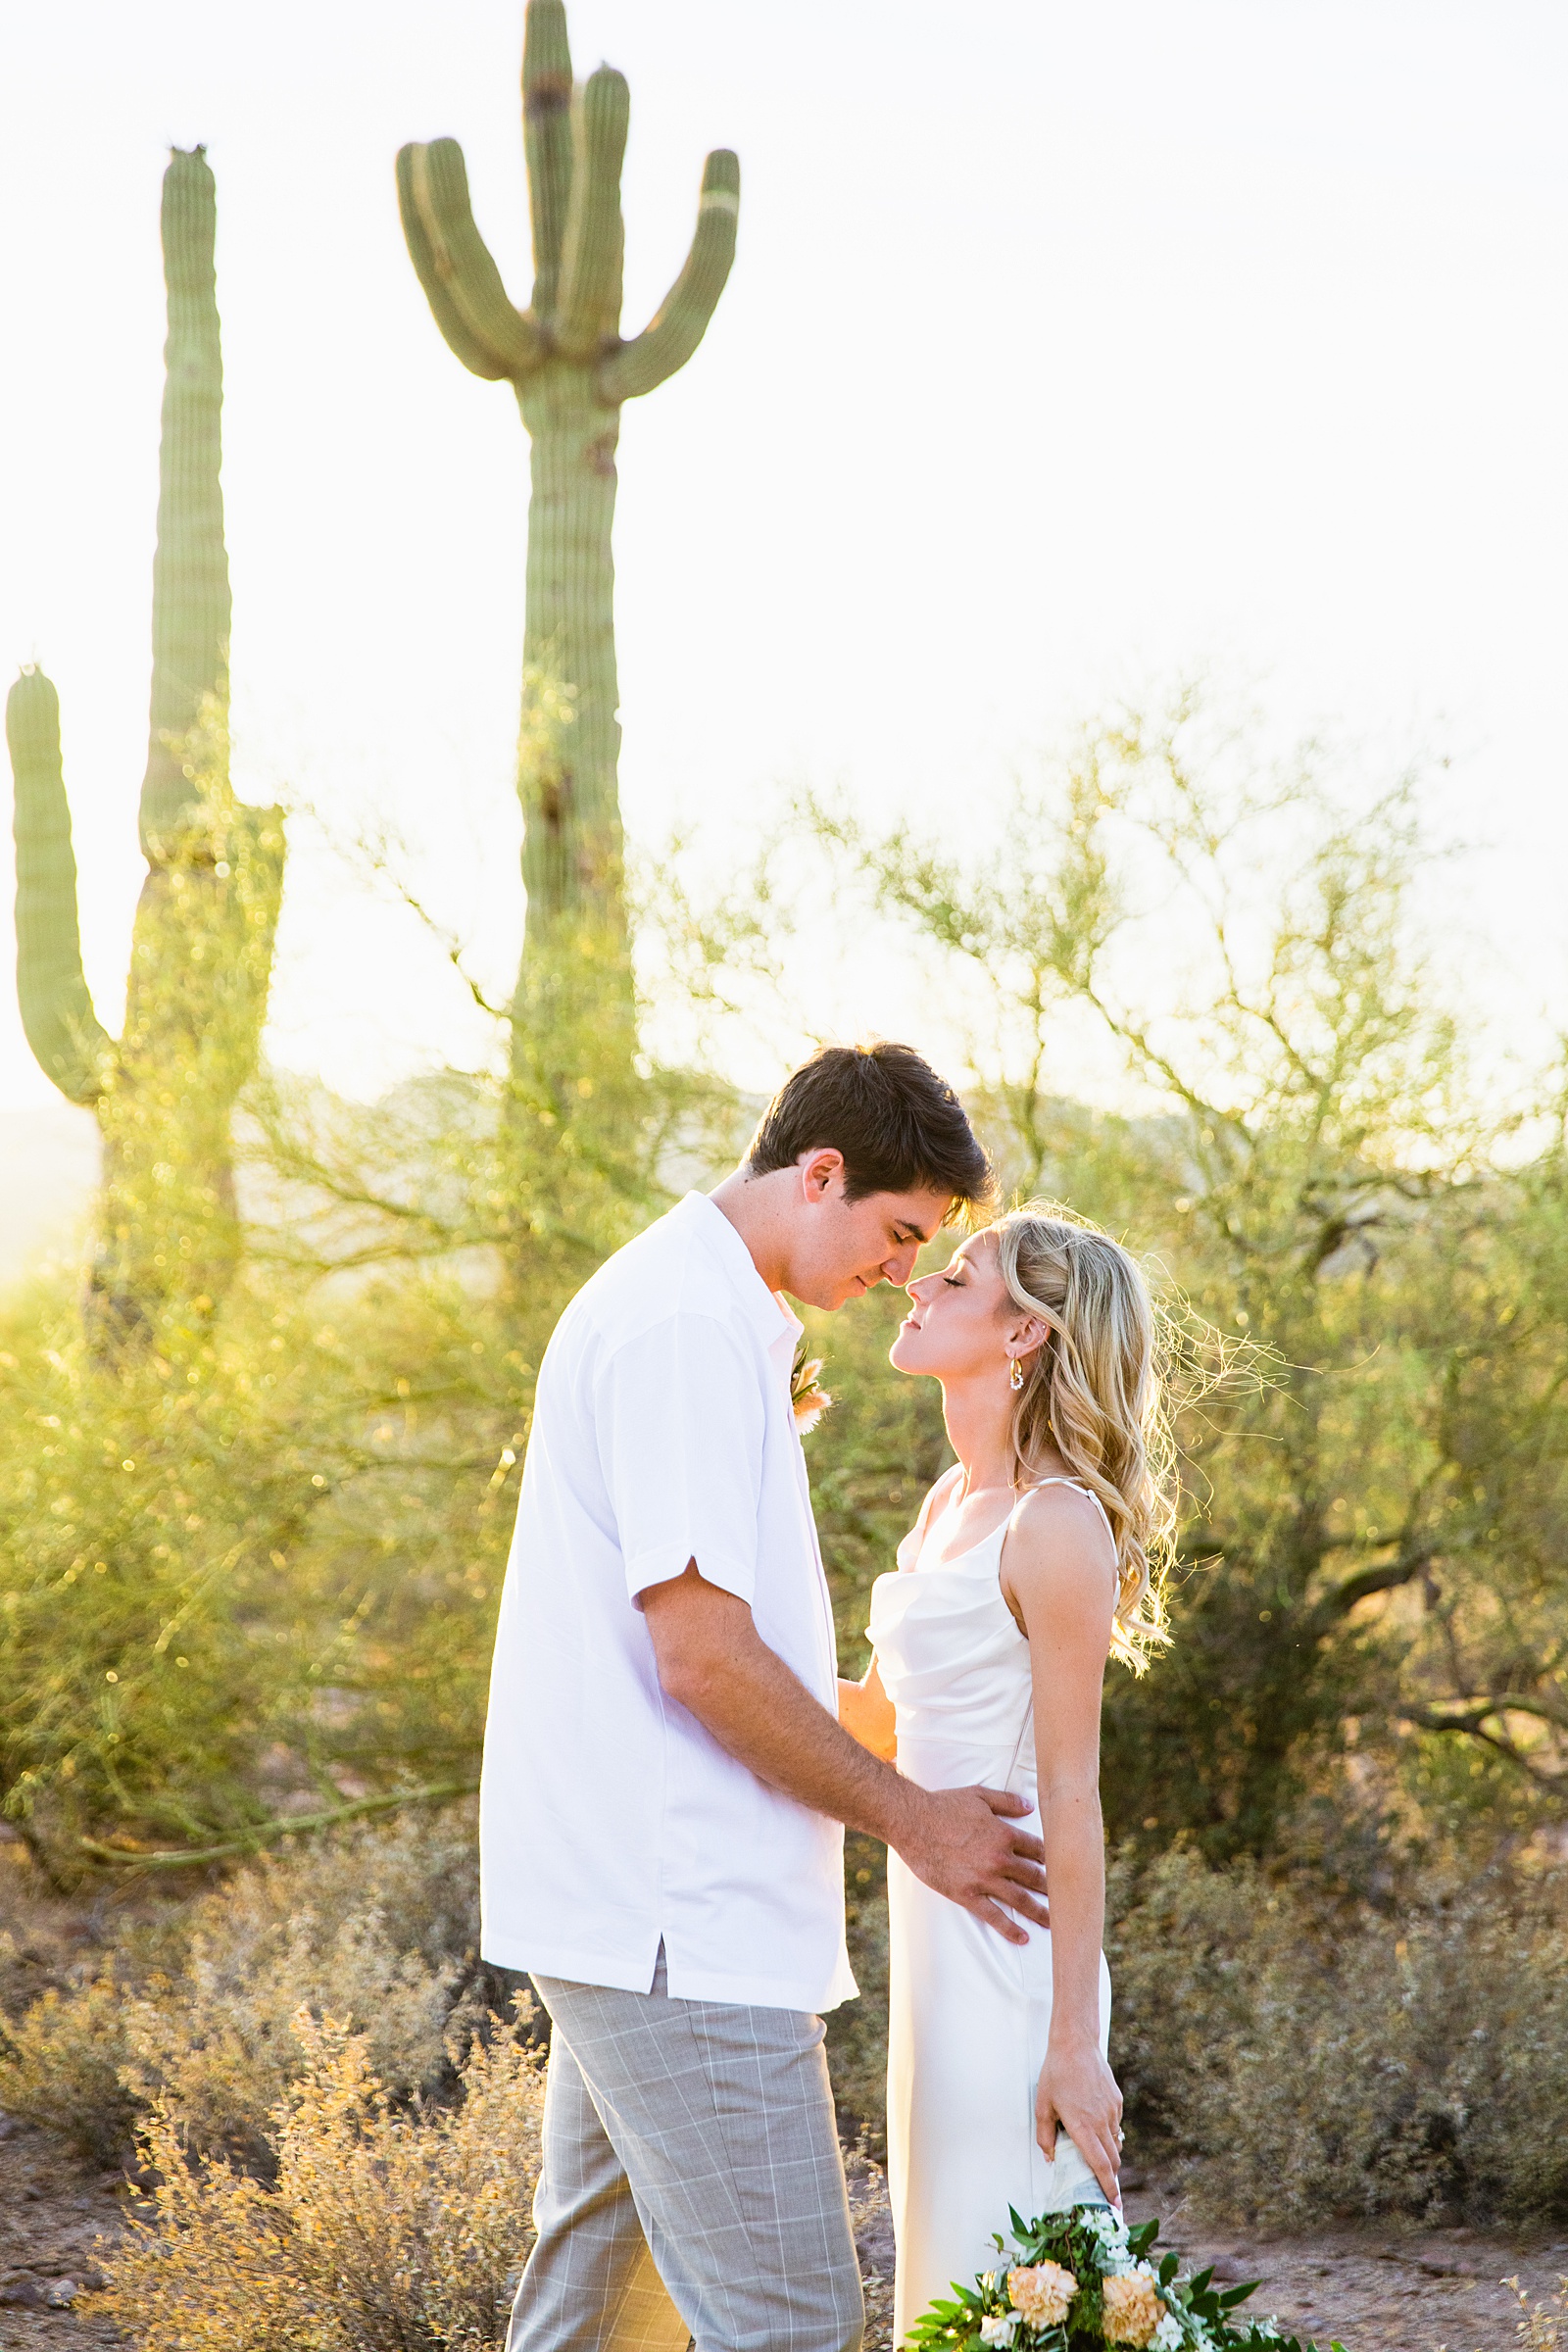 Bride and Groom share an intimate moment during their Superstition Mountain Micro wedding by Lost Dutchman wedding photographer PMA Photography.